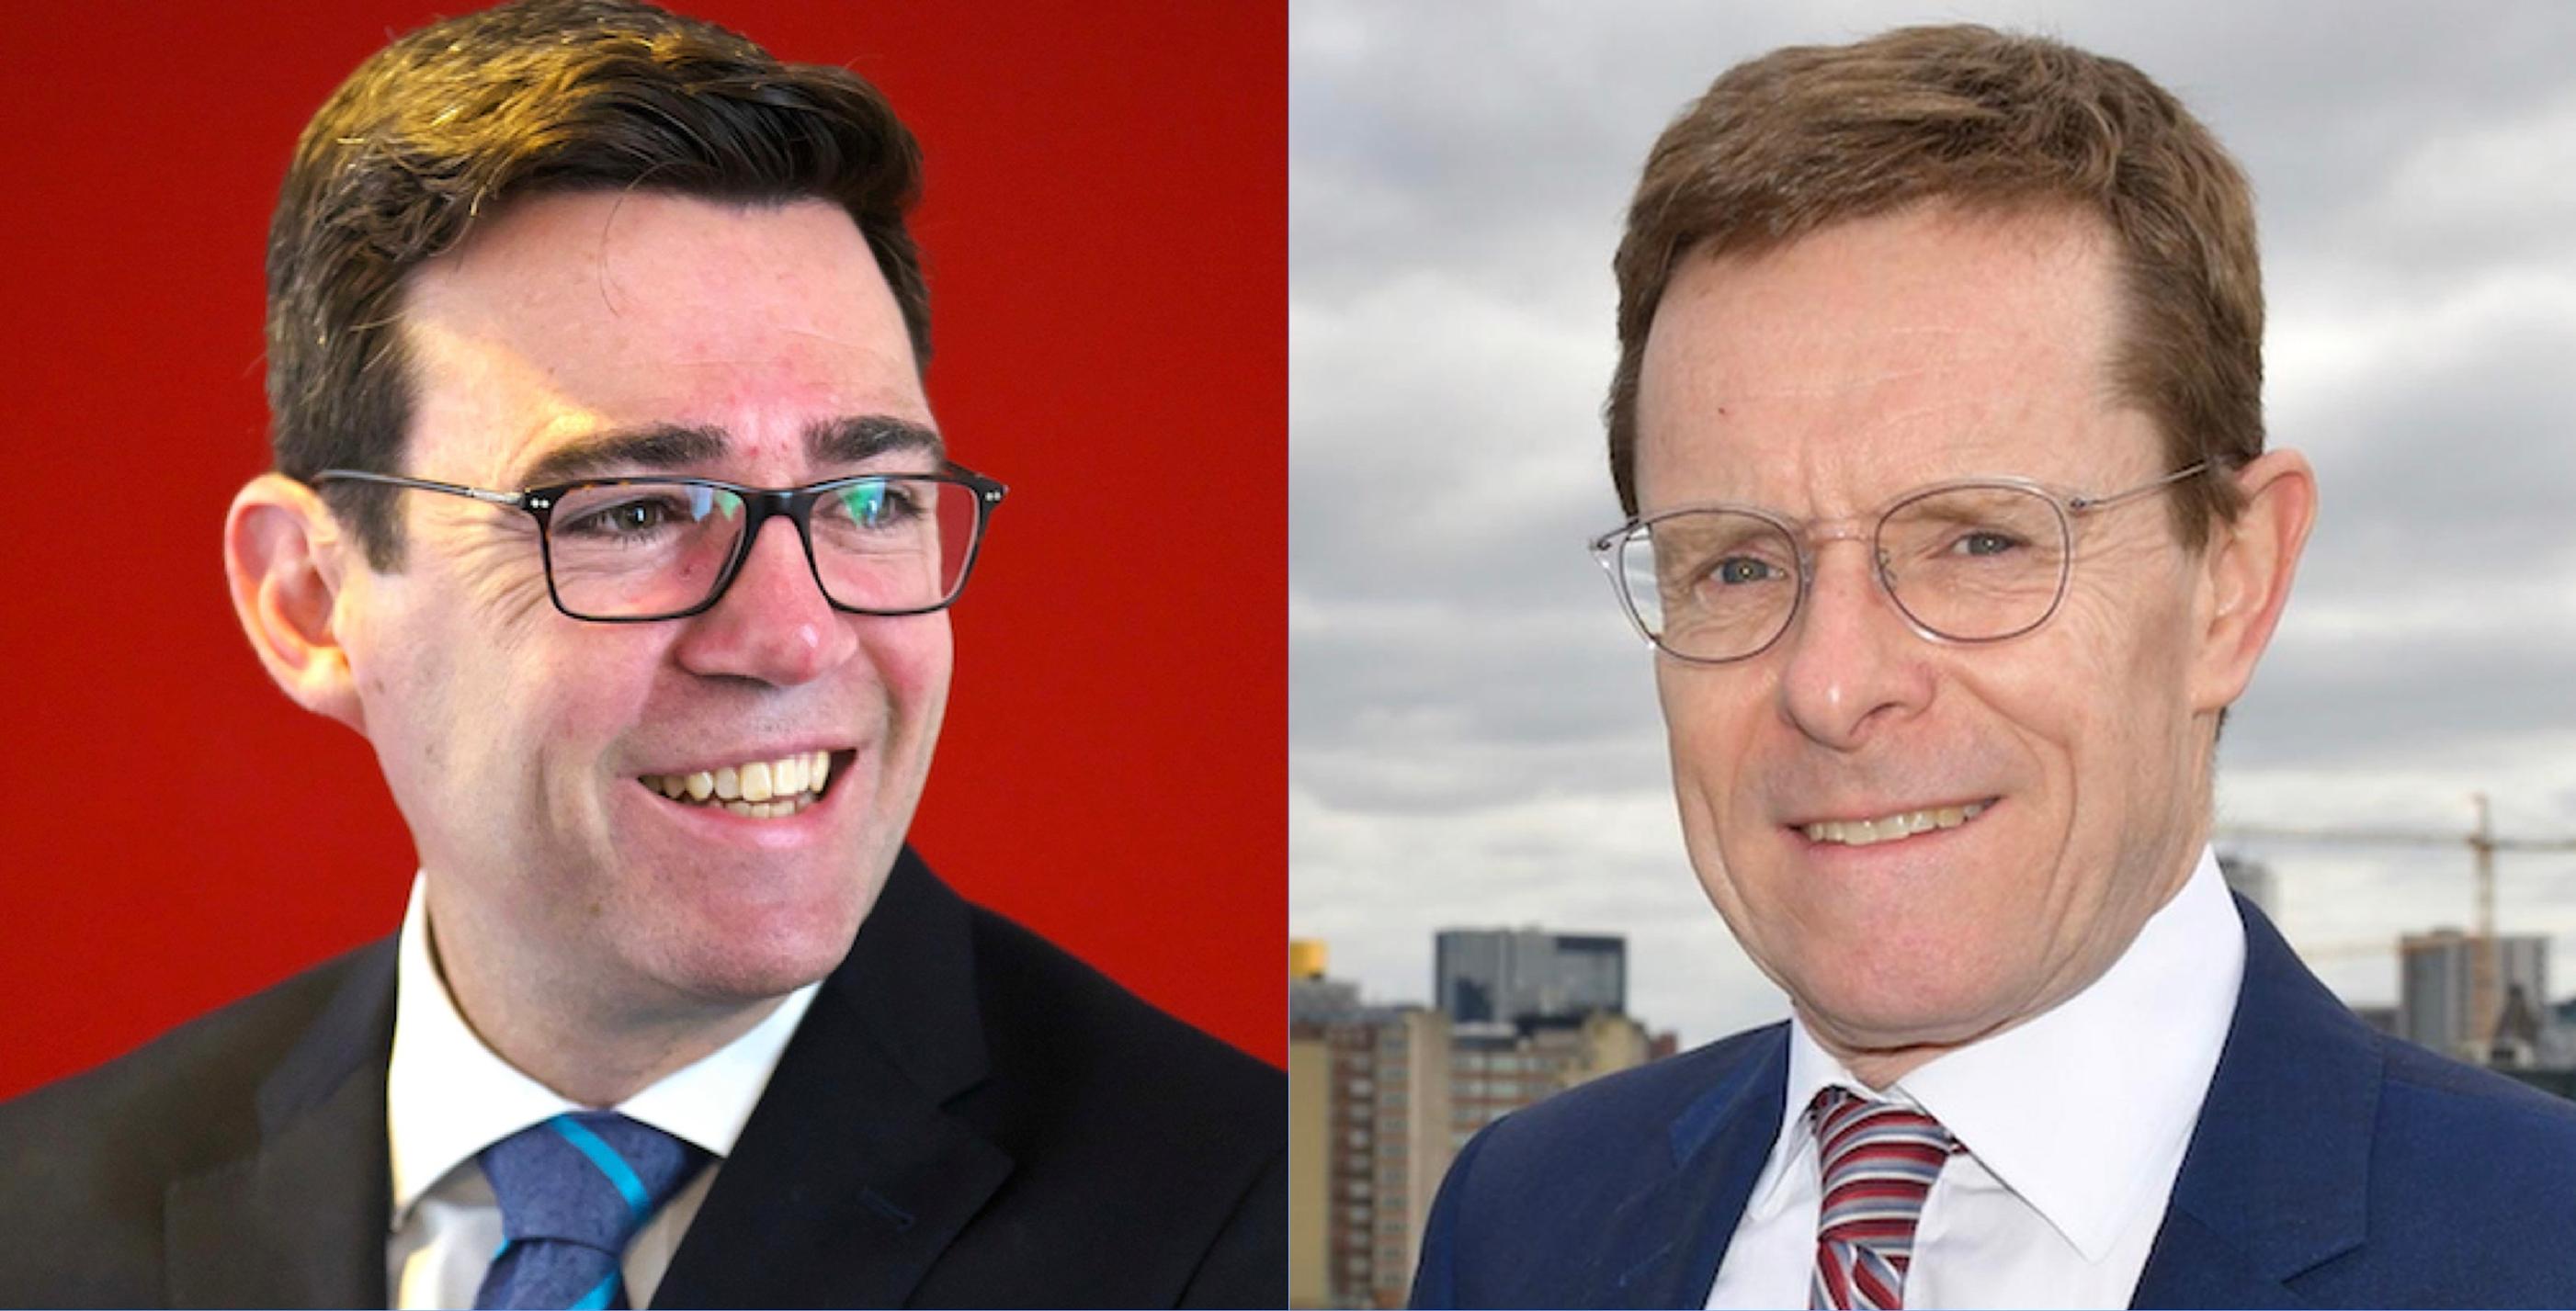 The mayors of Greater Manchester and West Midlands Andy Burnham and Andy Street